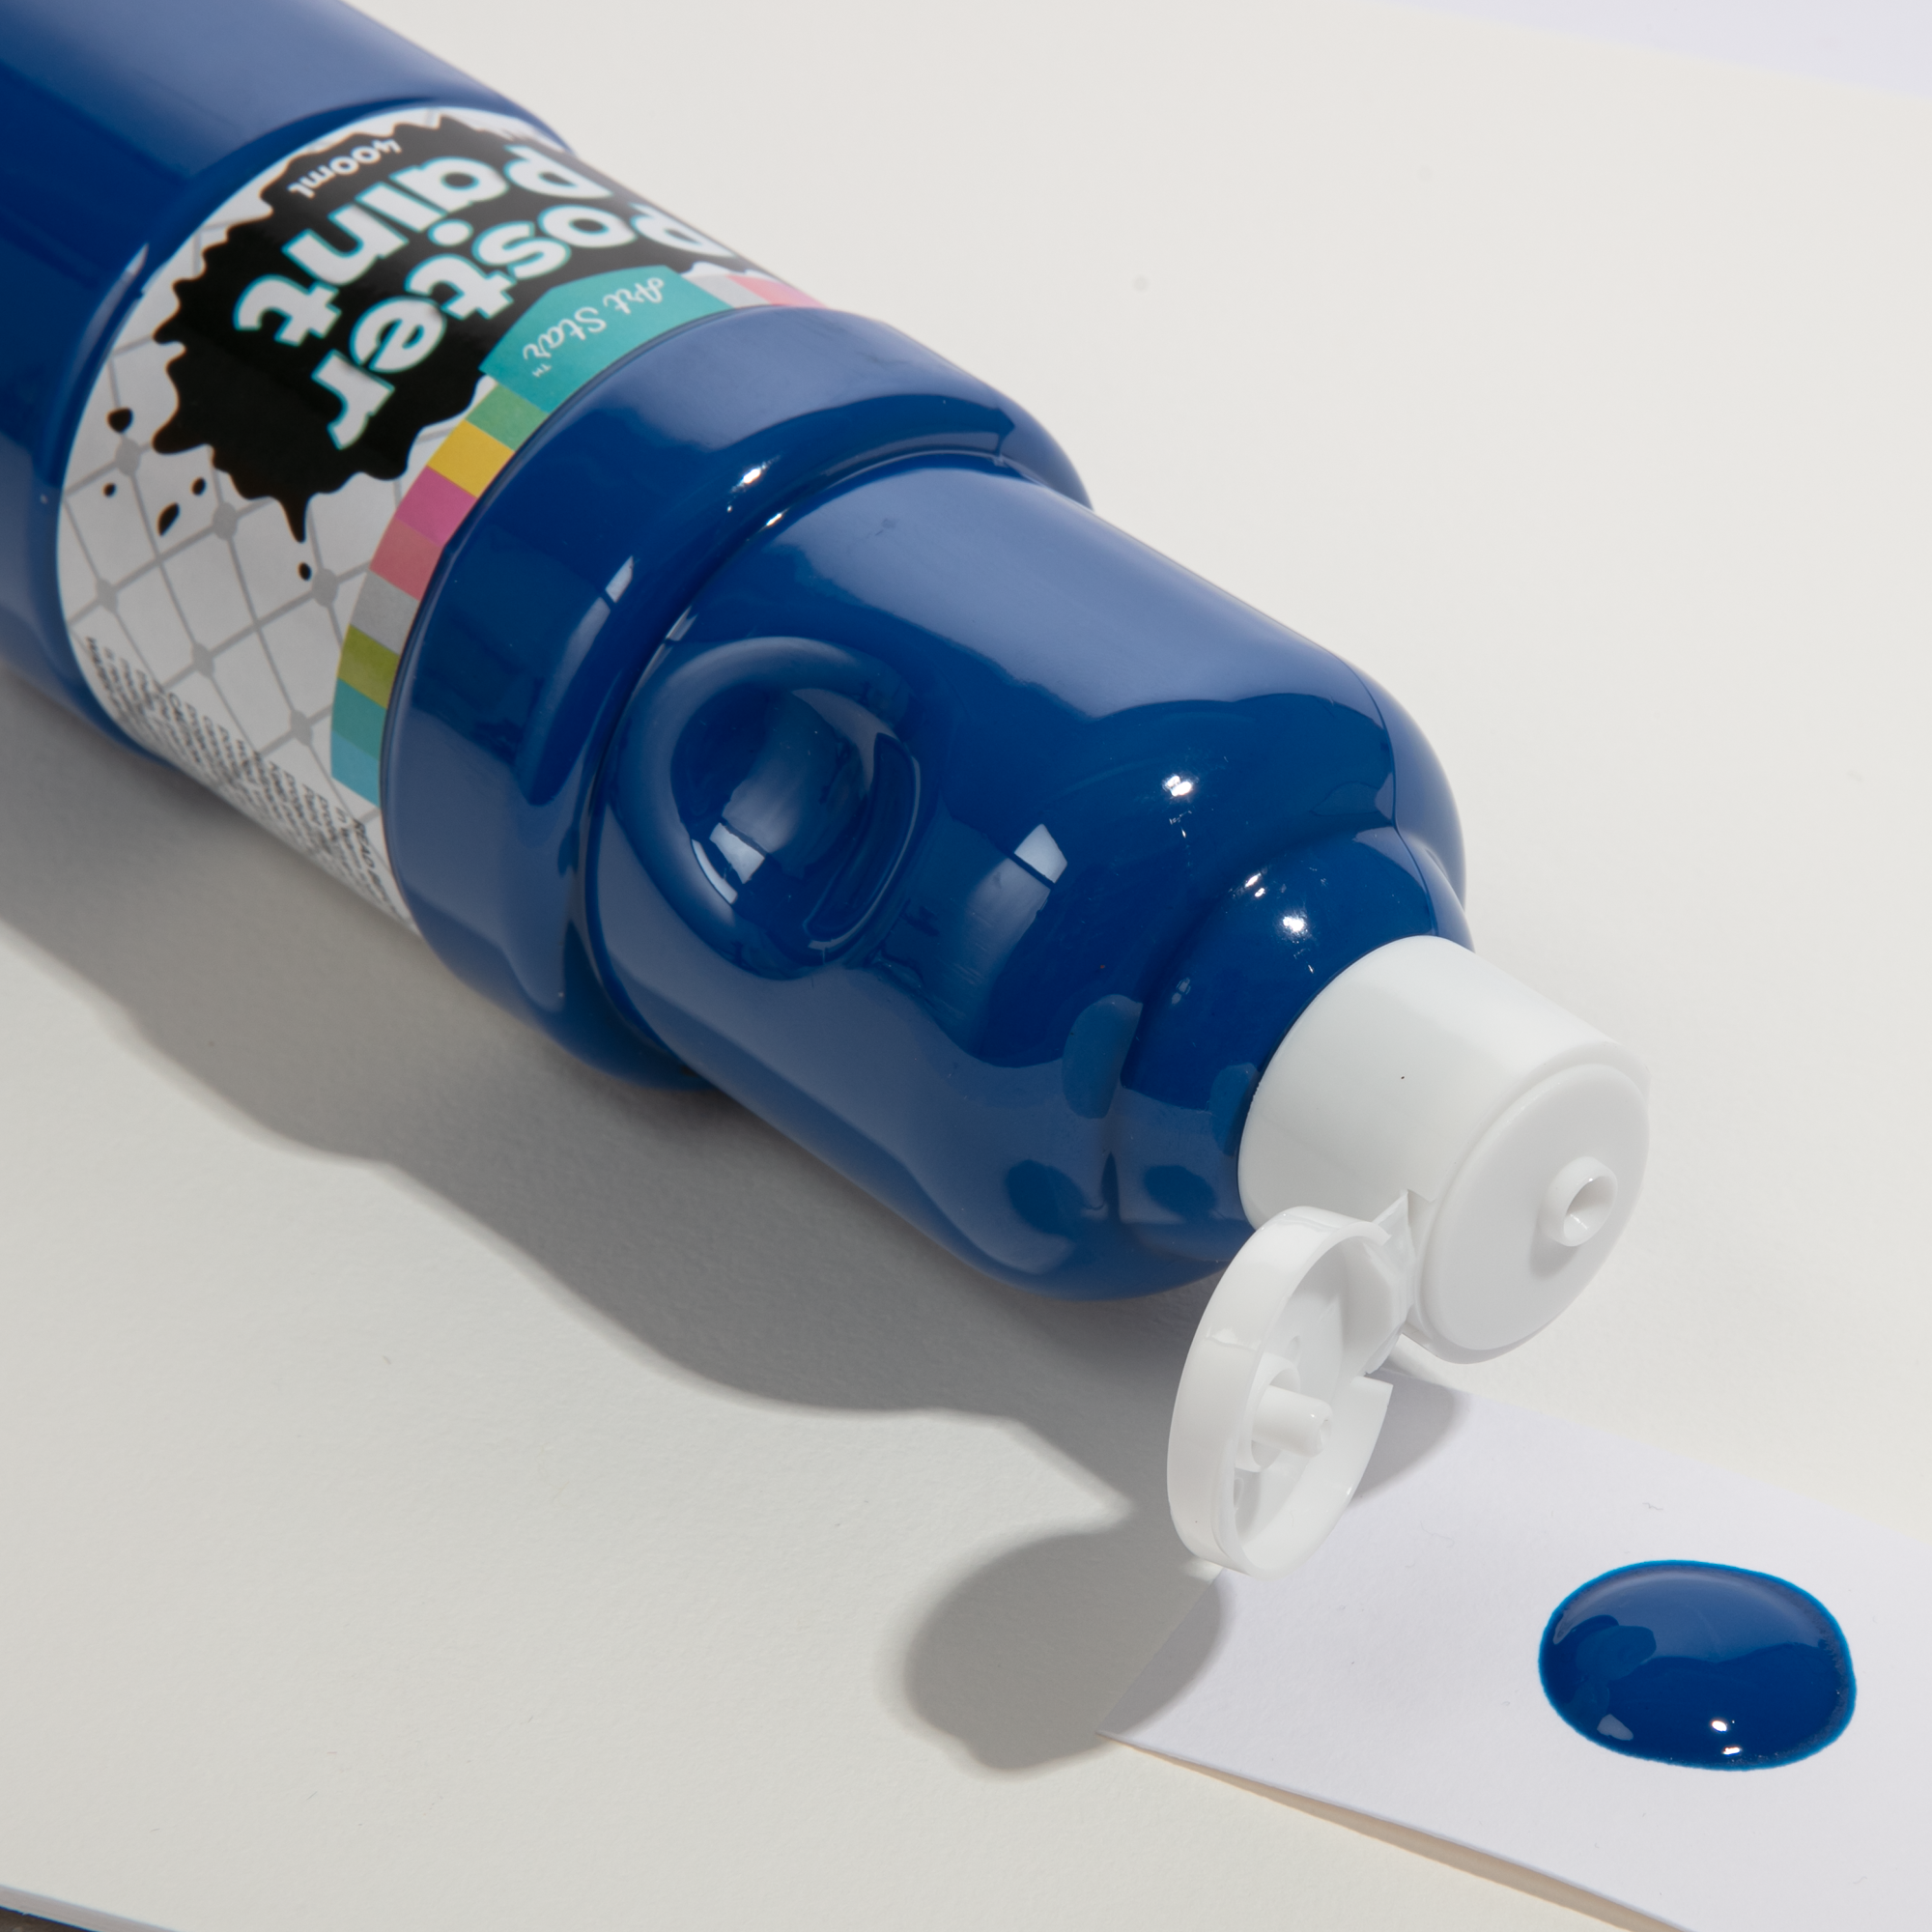 Have a look through our Art Star Poster Paint Blue 400ml FPL Art Star Poster  Paint Blue 400ml FPL selection for less